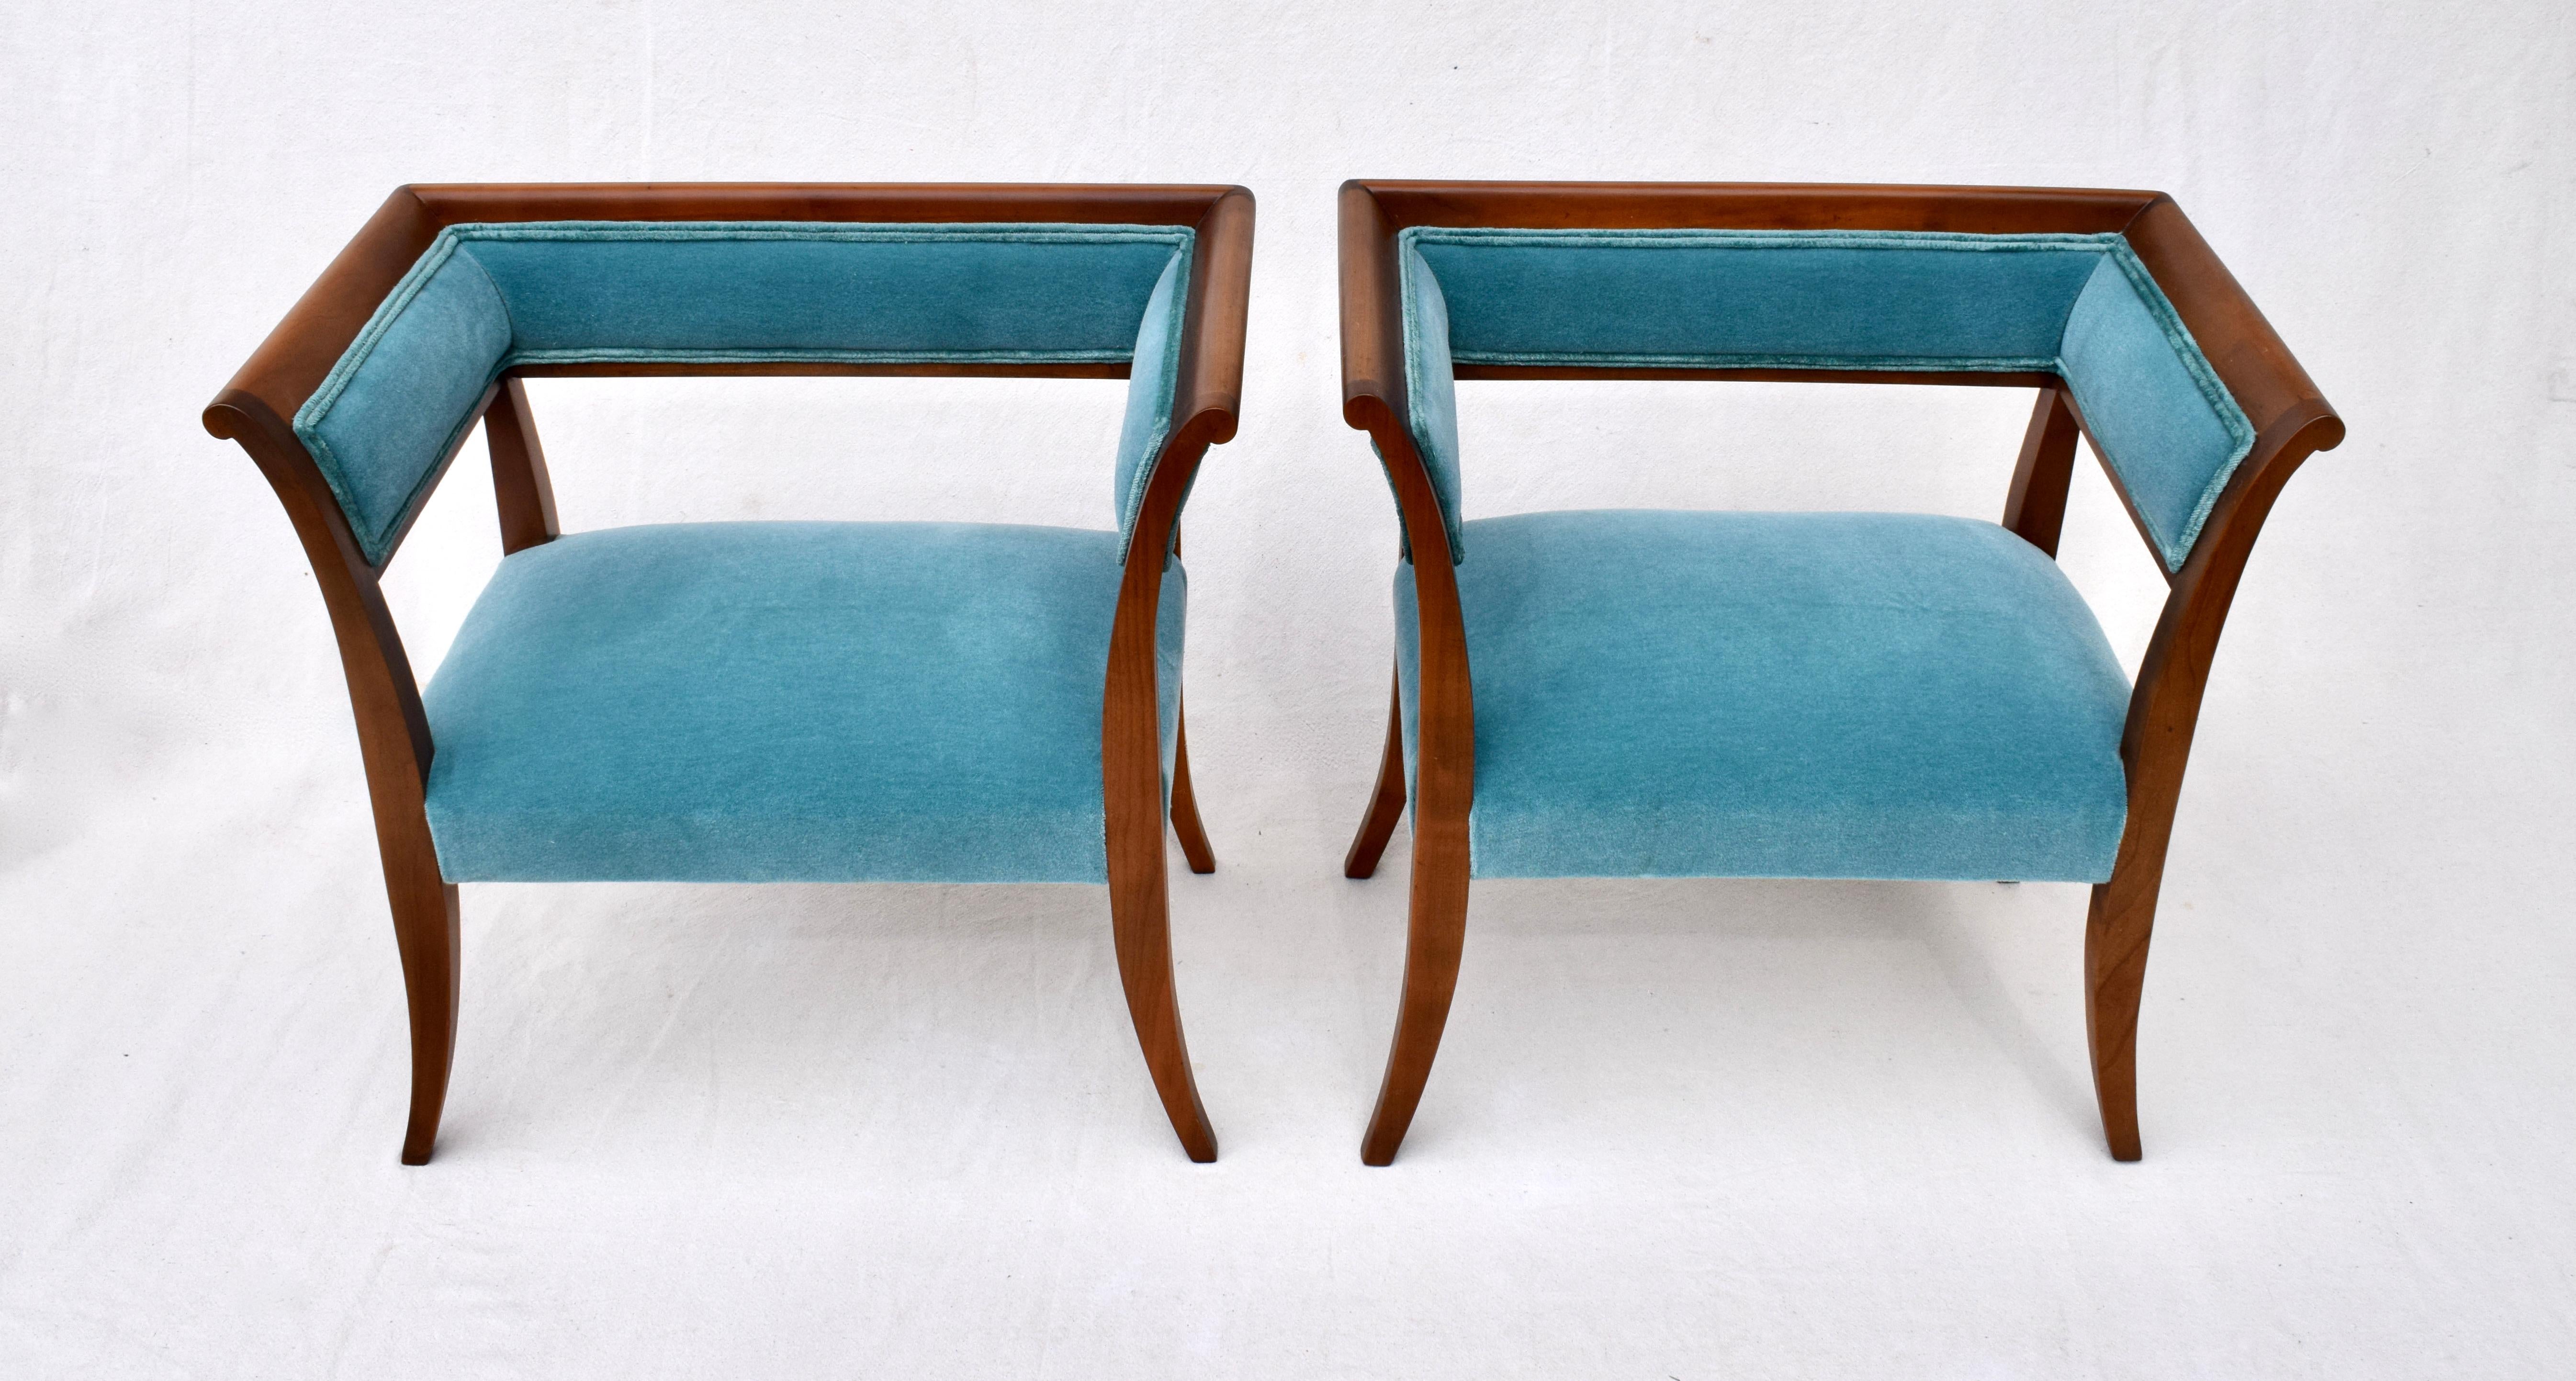 An elegant pair of Regency stools or benches upholstered in teal Mohair.
Solid wood construction with Klismos styling. Branded 